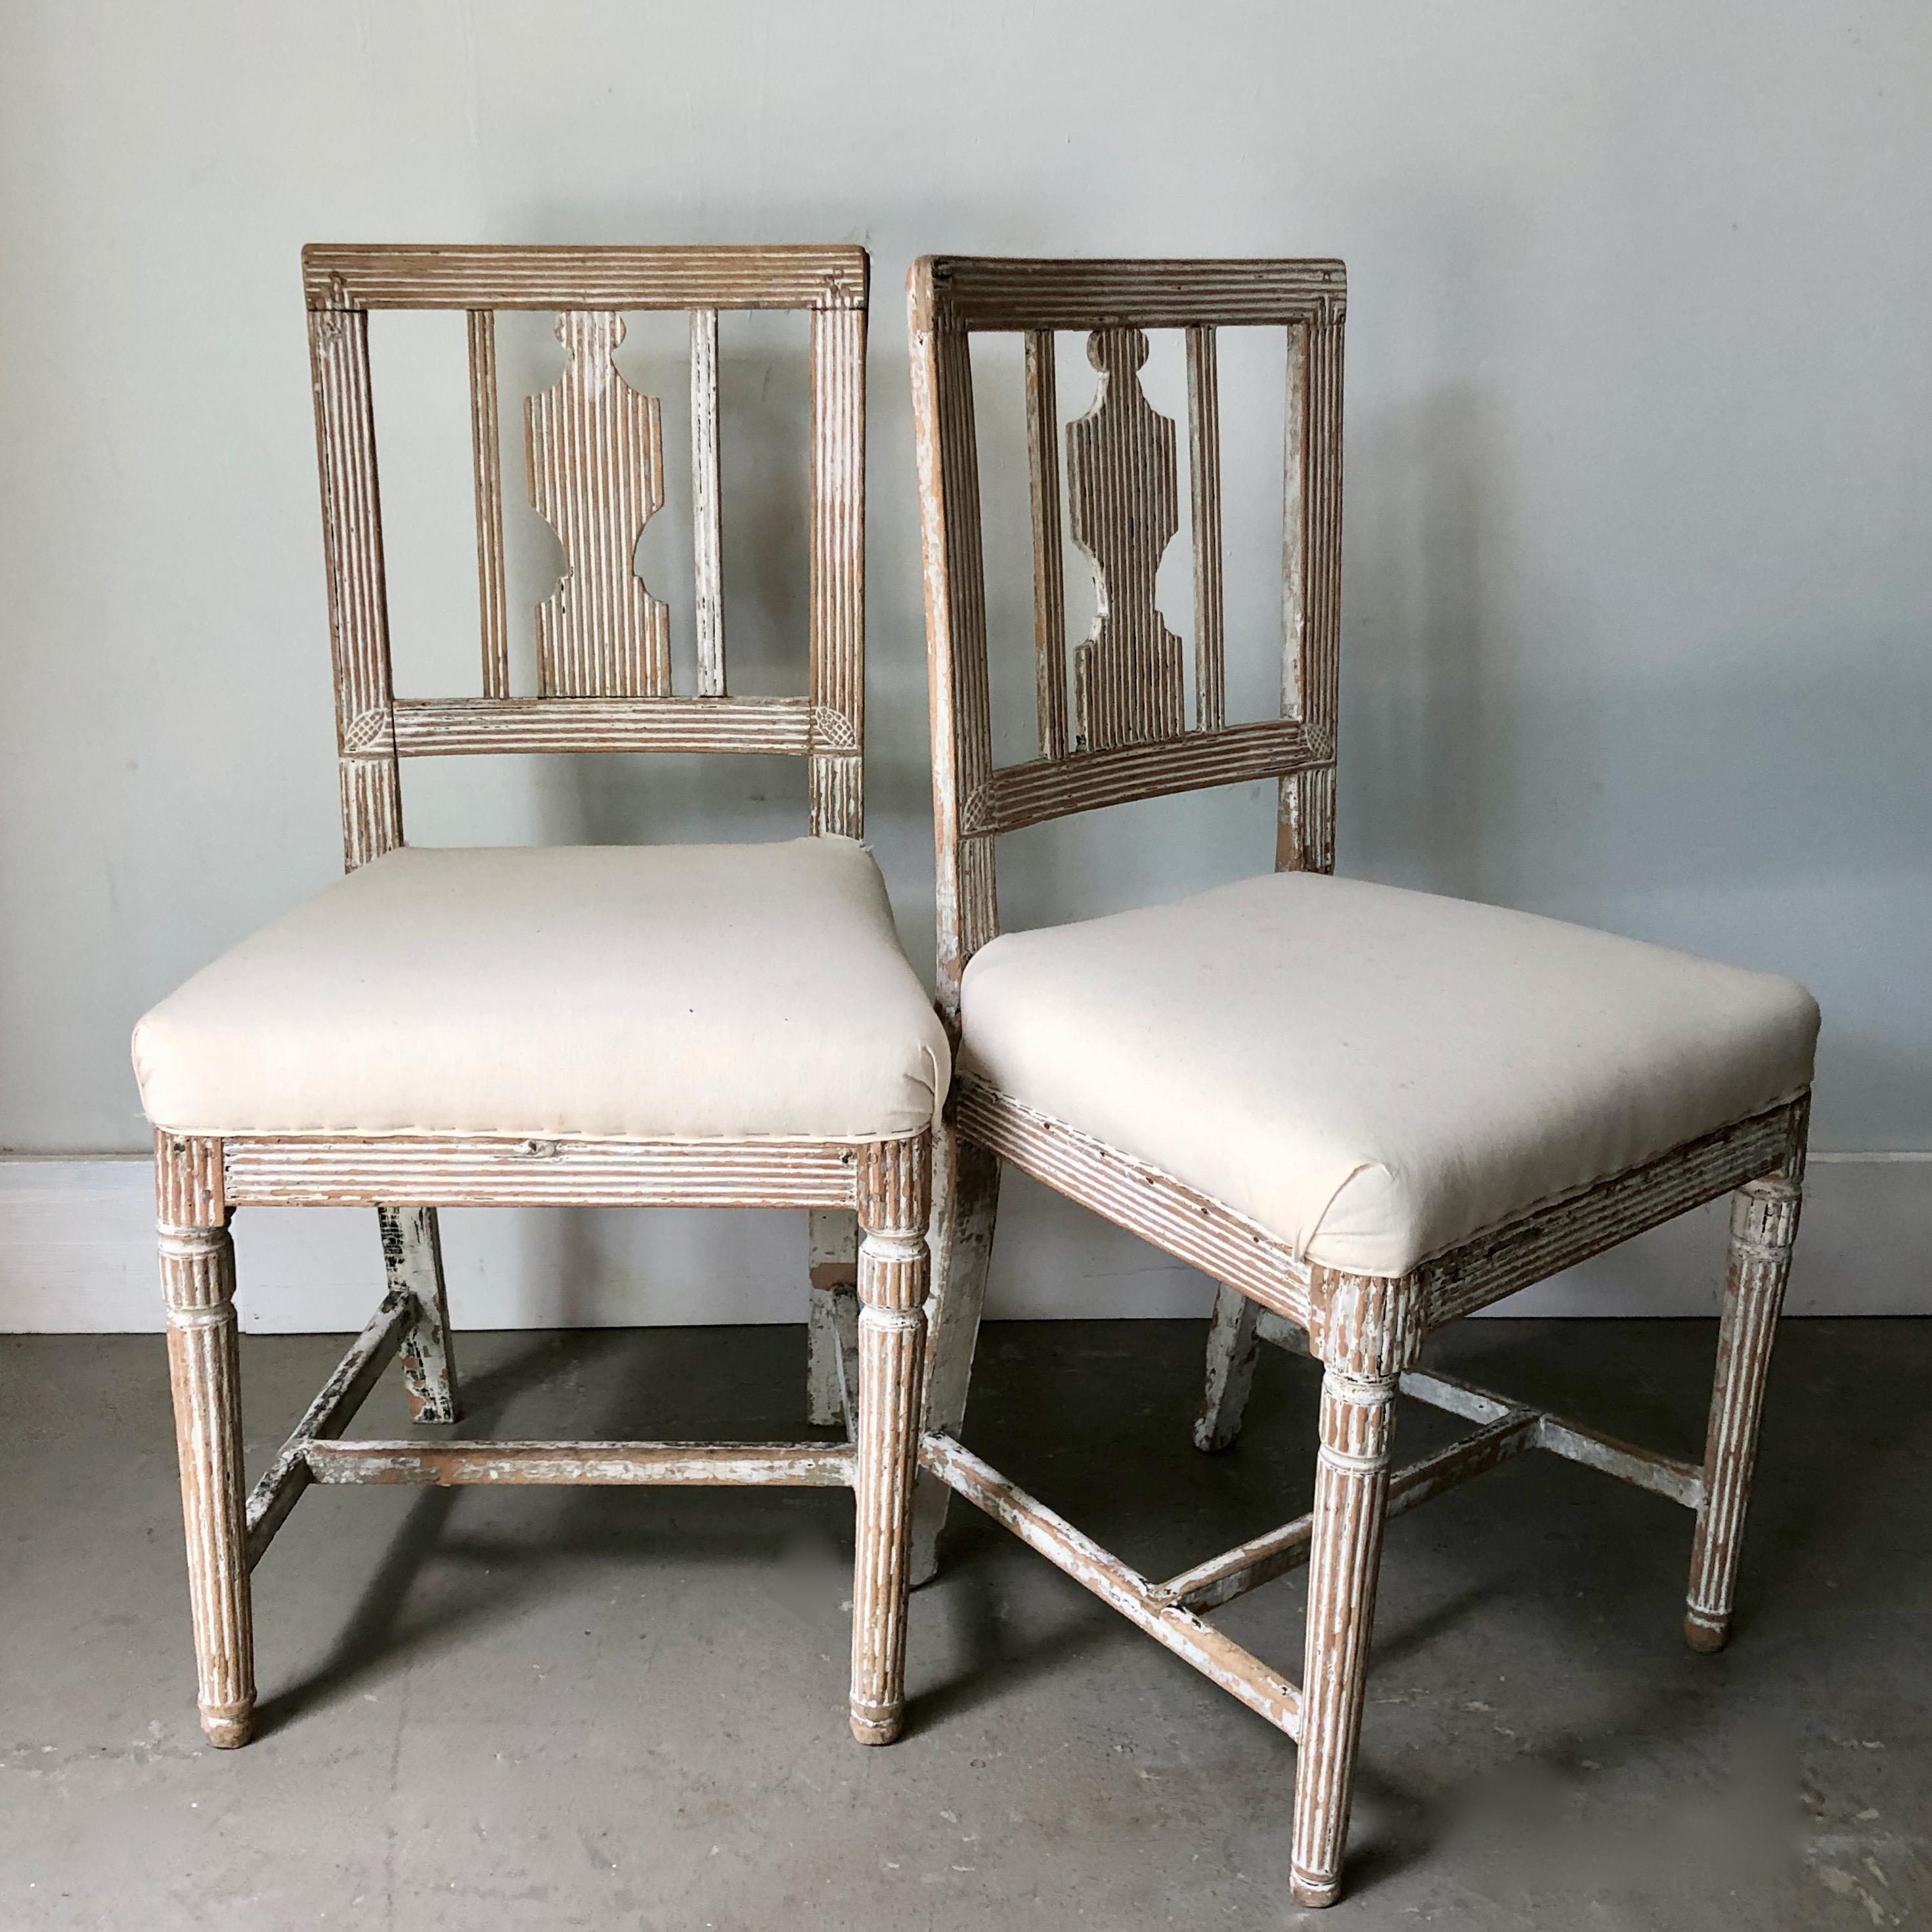 A pair of 19th century Swedish Gustavian period side chairs with reeded frame and carved design on center back in well worn patina ready for your own fabric.
Sweden, circa 1820.
 